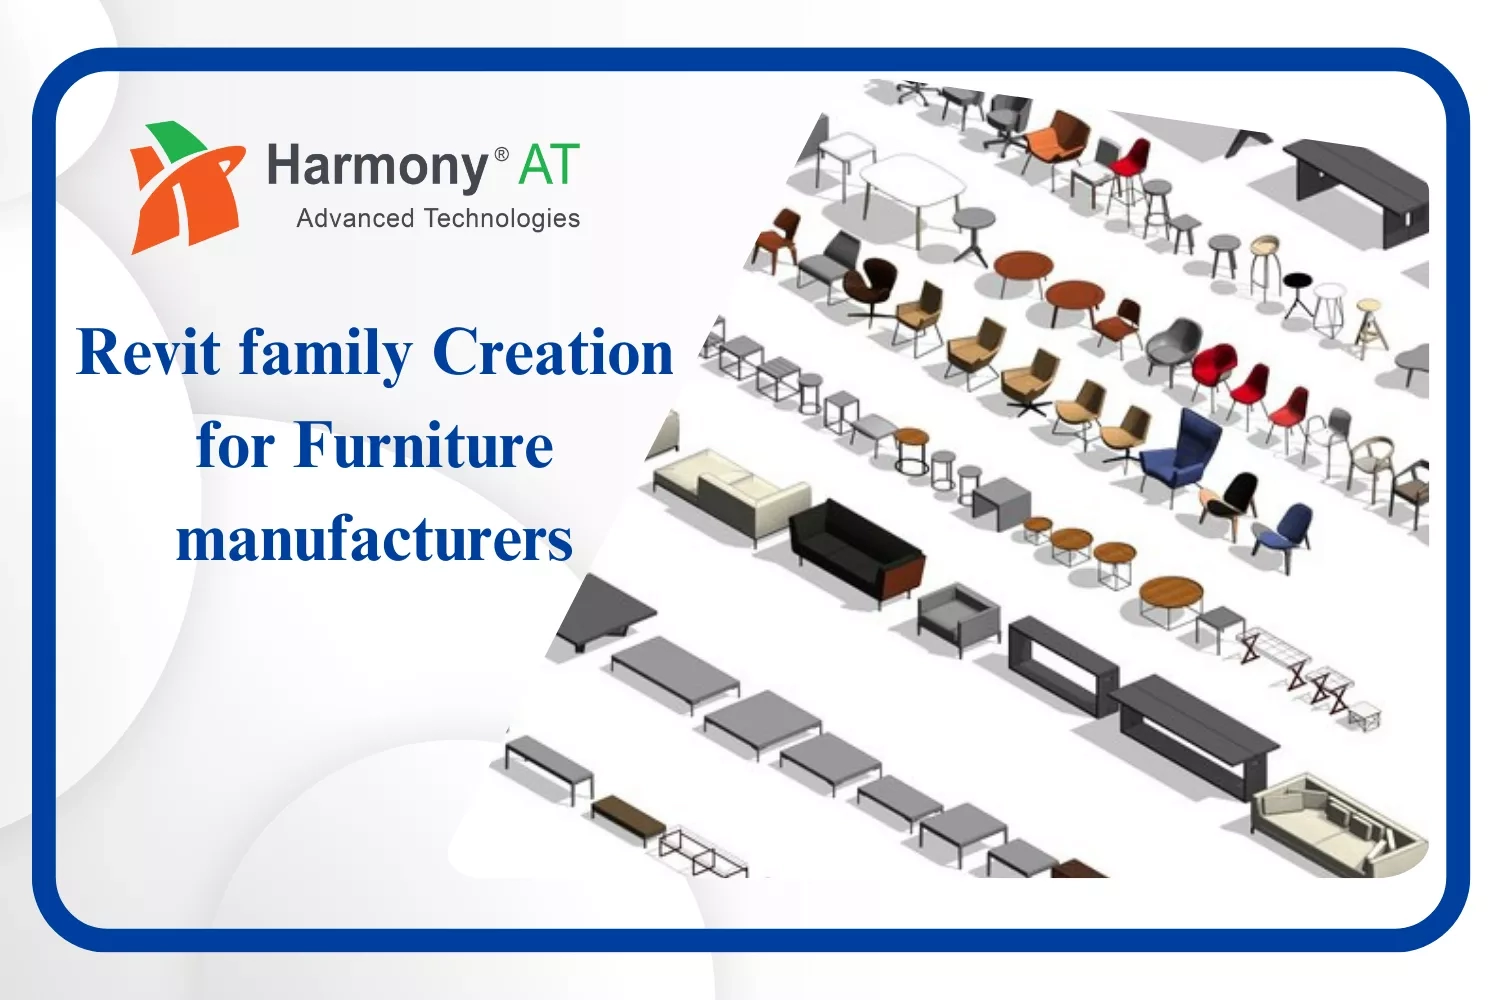 Revit furniture family creation services